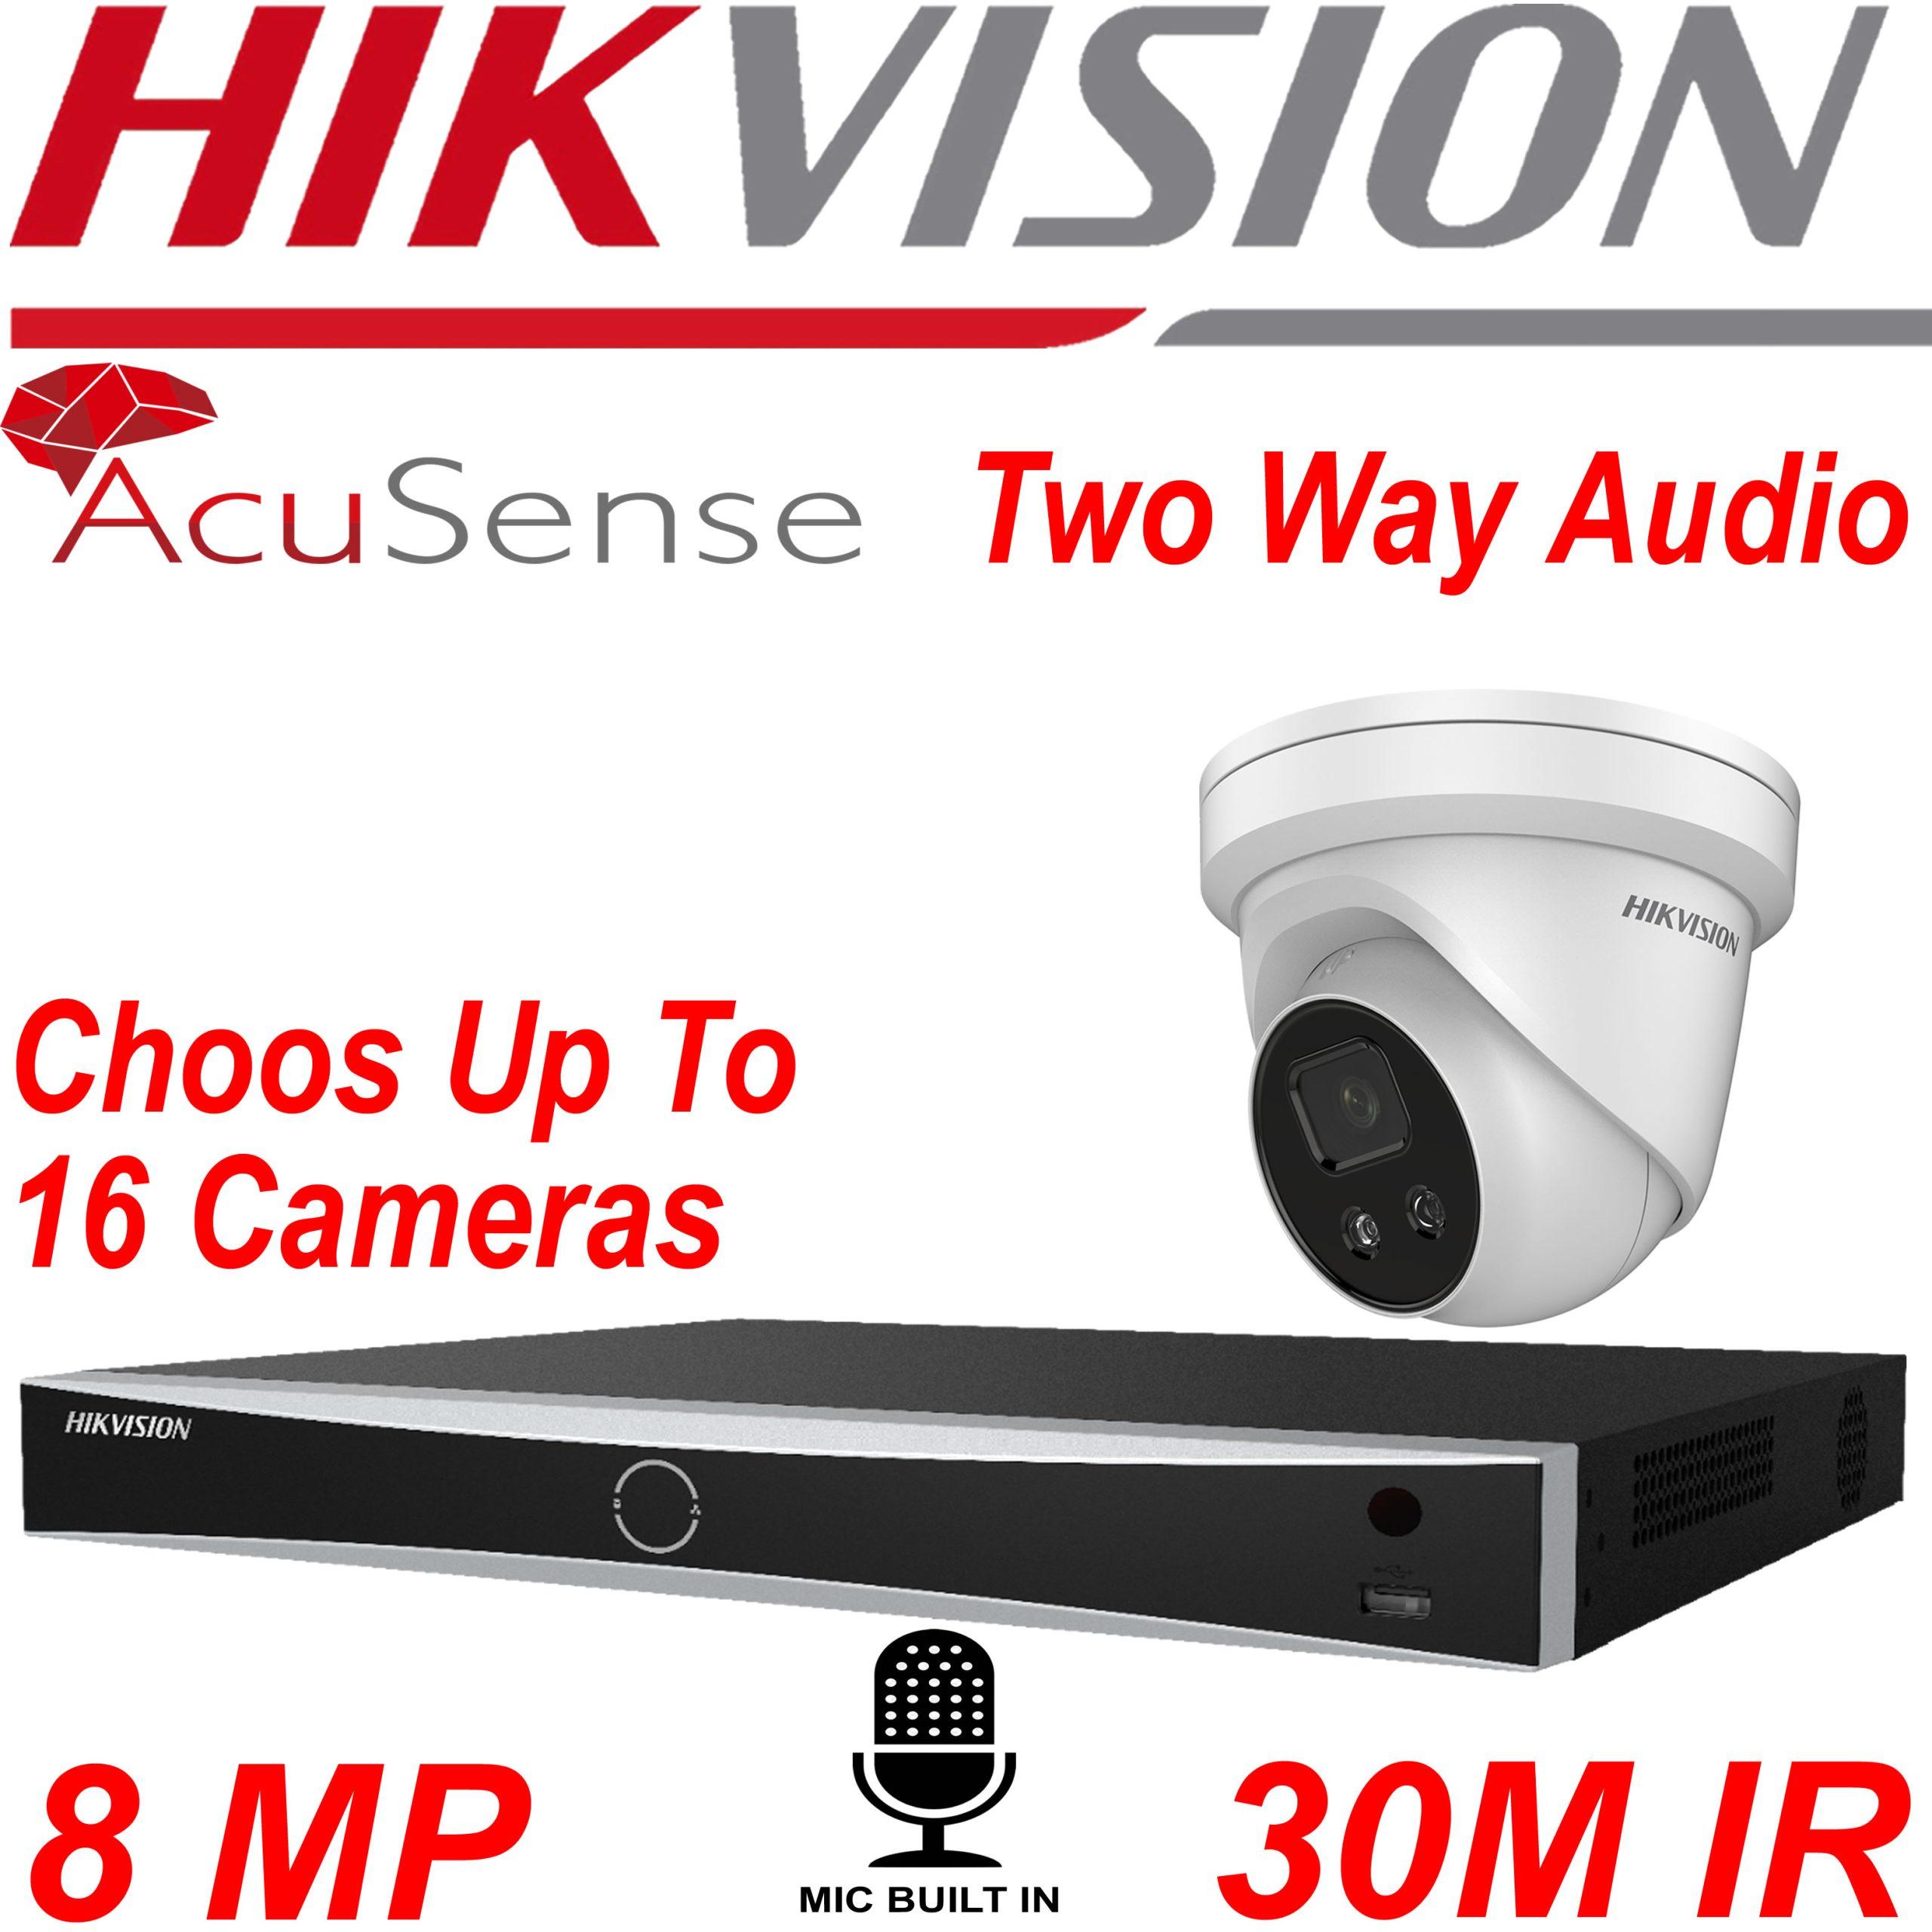 Product 8MP Hikvision DS-2CD2386G2-ISU/SL Two Way Audio Darkfighter Camera 4K A.I Intelligent IP POE NVR CCTV System - AAA CCTV image